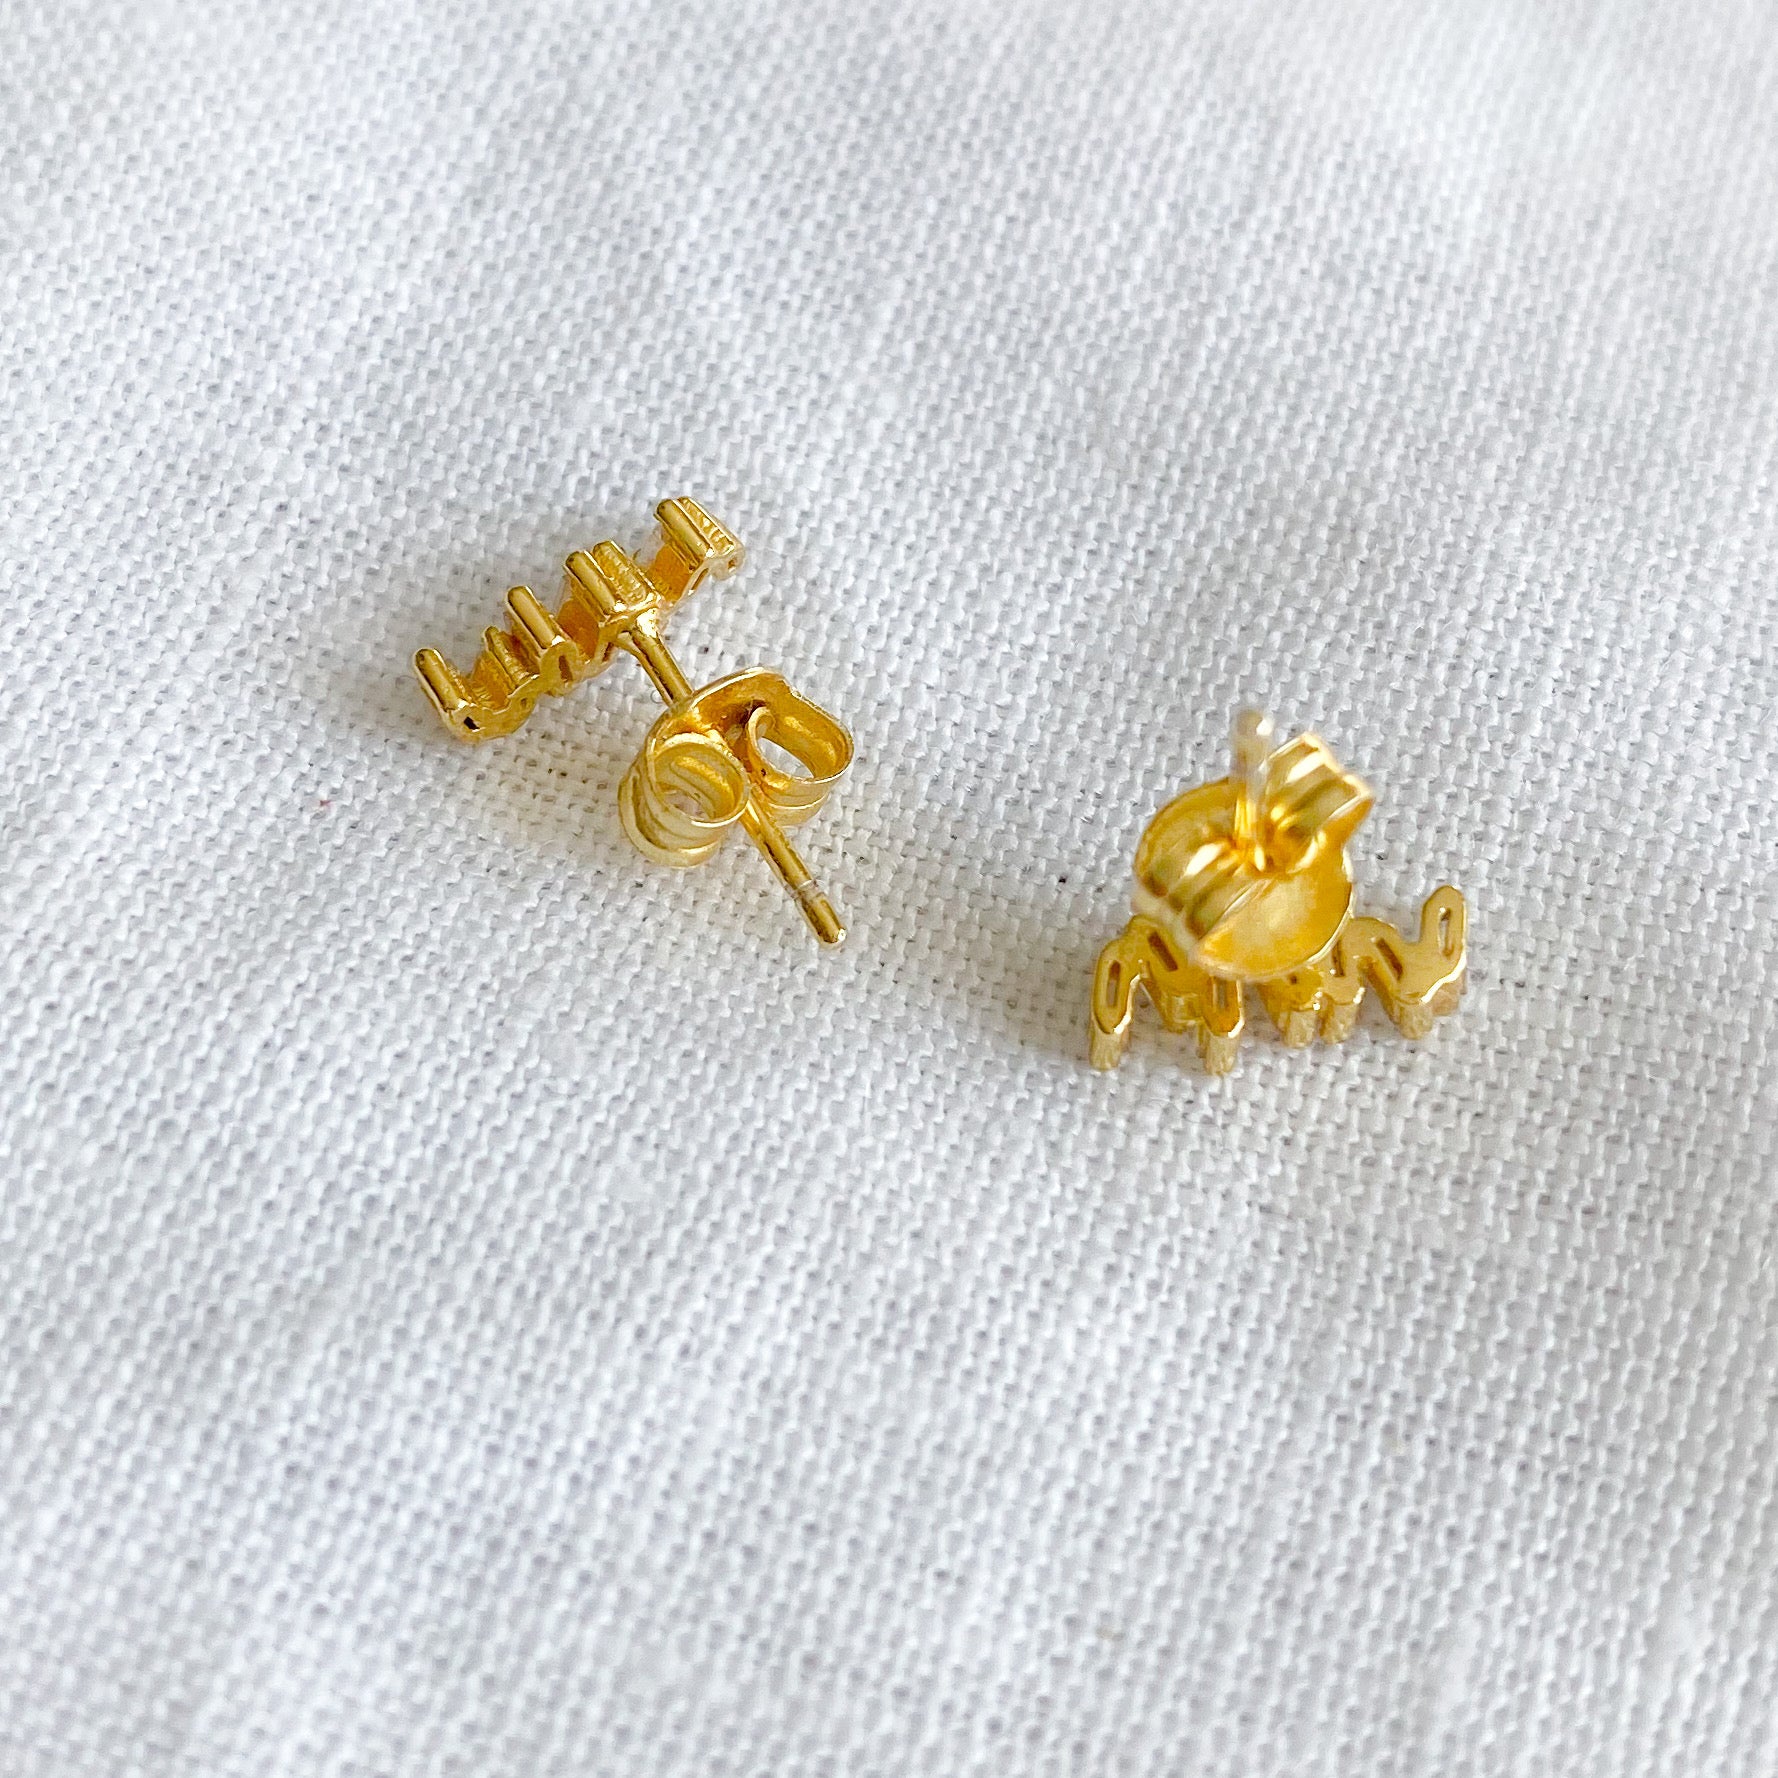 Marmont Earrings BelleStyle - sterling silver gold plate stud post everyday baguette crystals